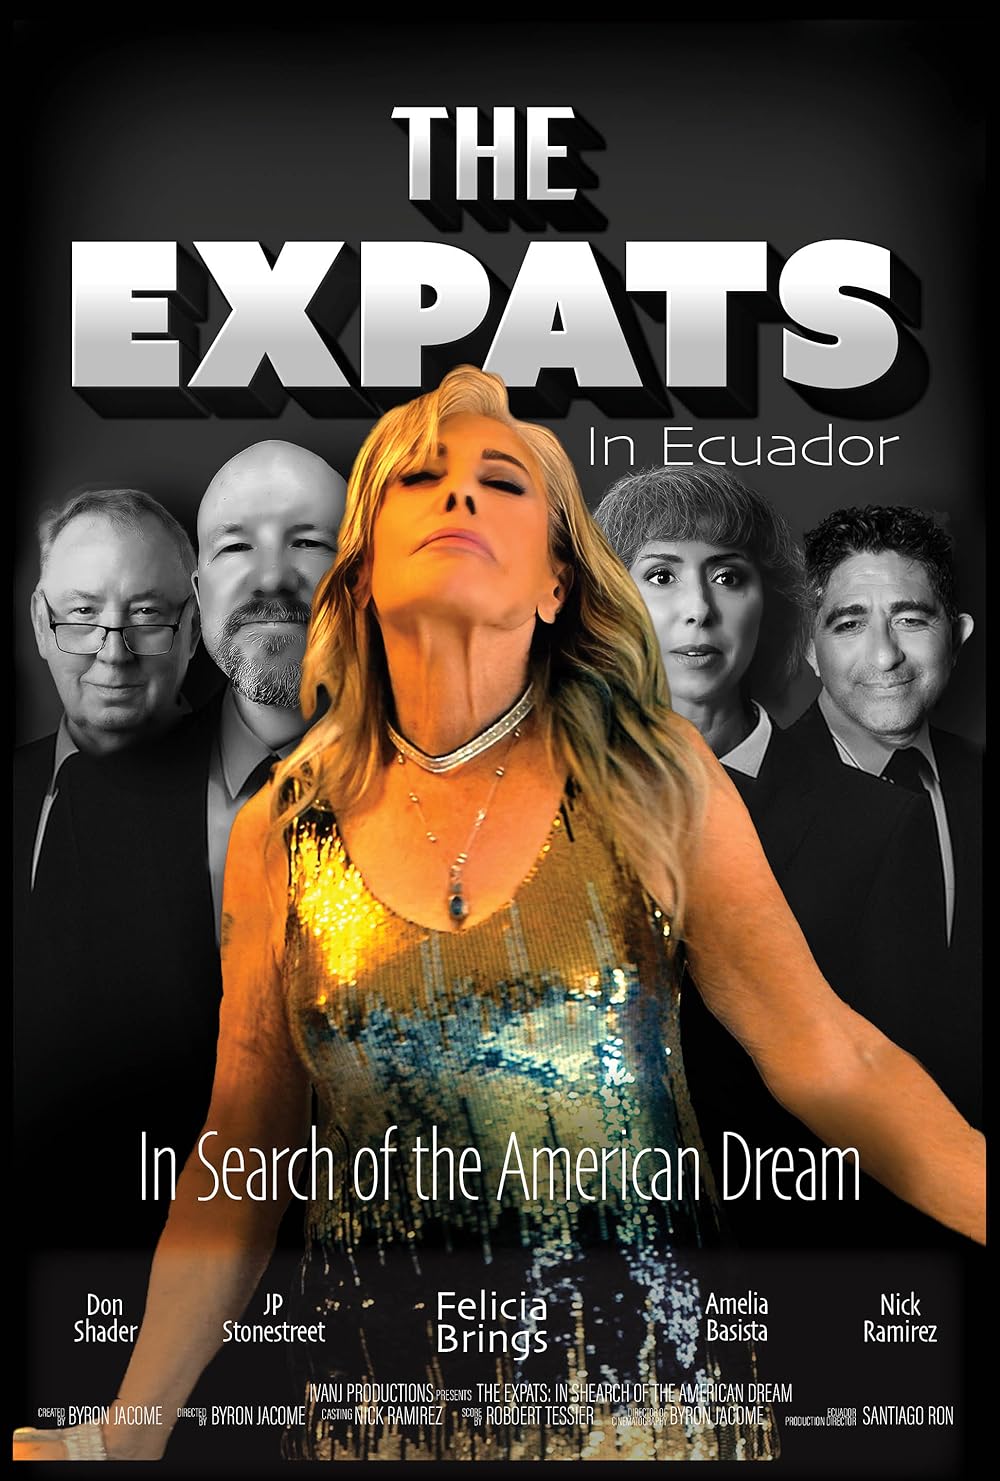 The EXPATS: In Search of the American Dream